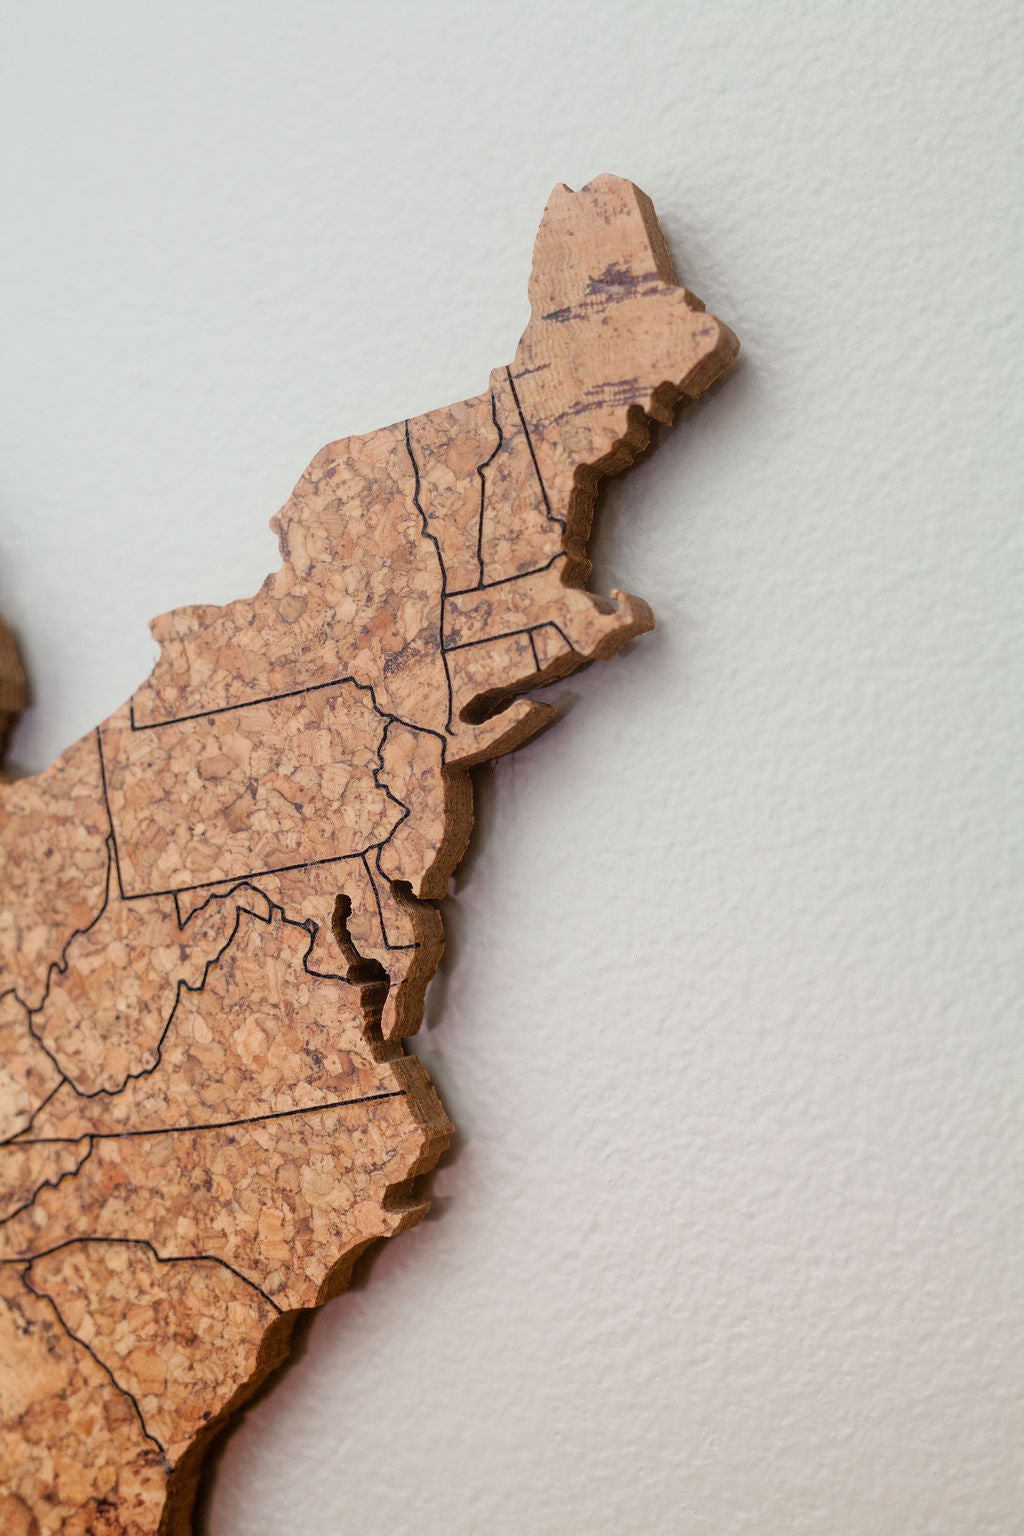 GEO 101 Design - Cork Map of the United States - Small Size